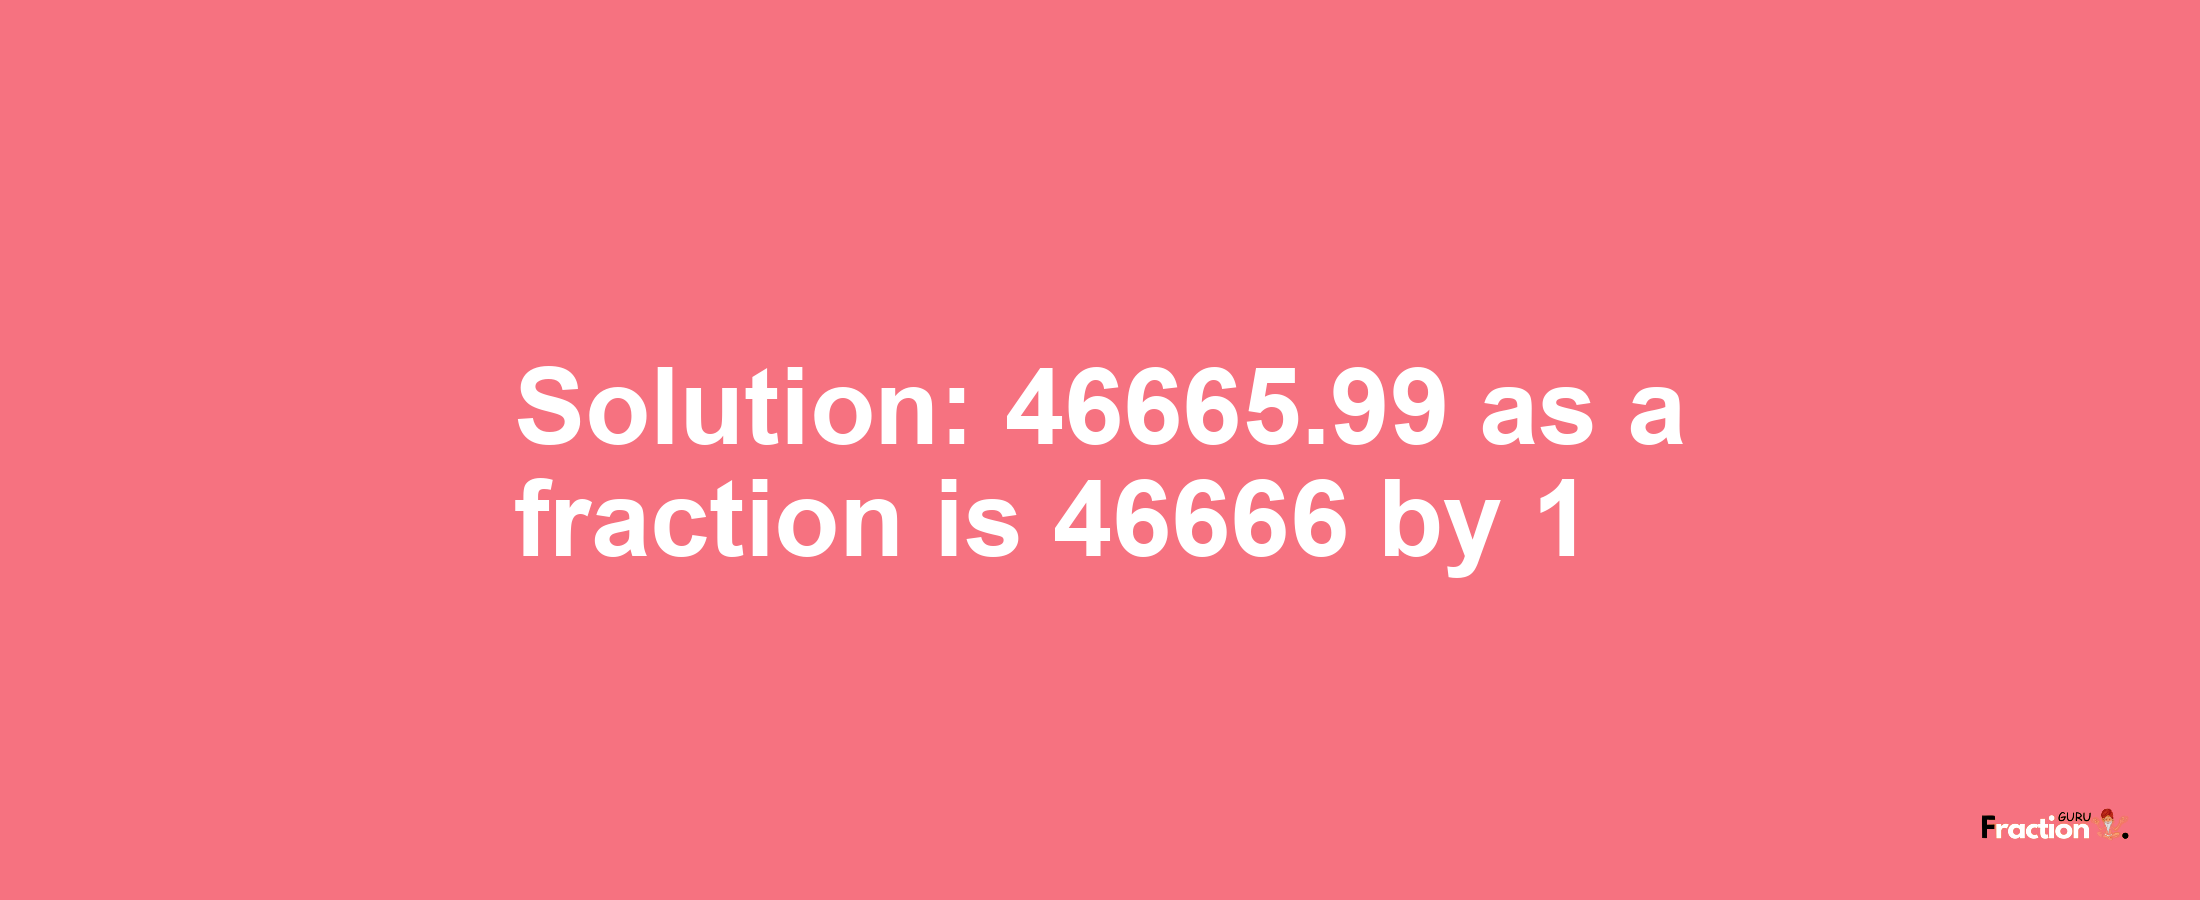 Solution:46665.99 as a fraction is 46666/1